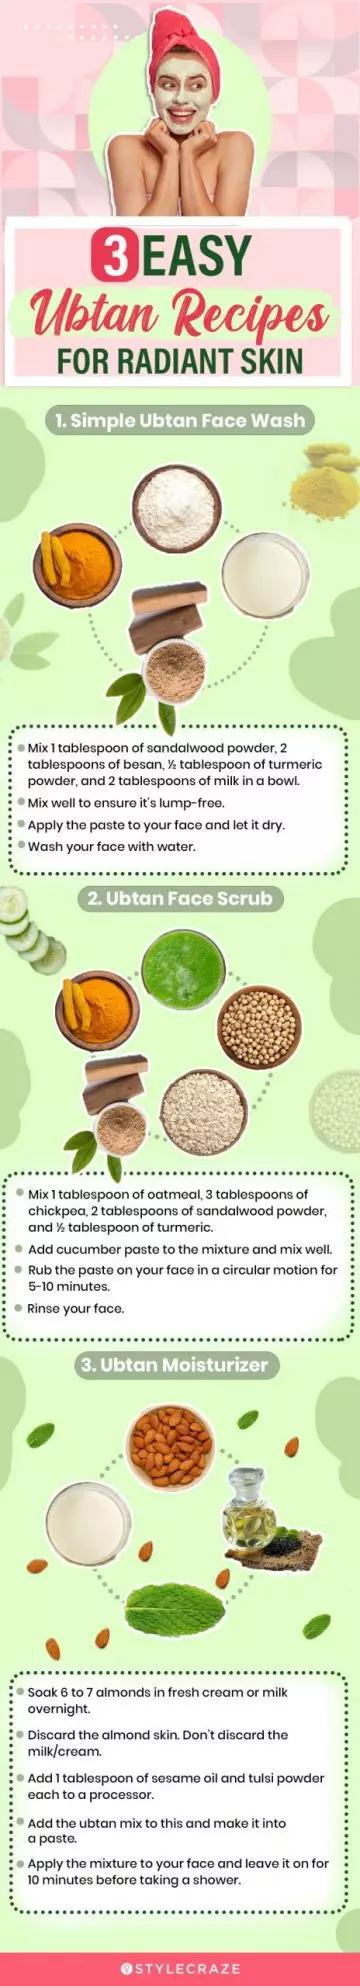 3 easy ubtan recipes for radiant skin (infographic)